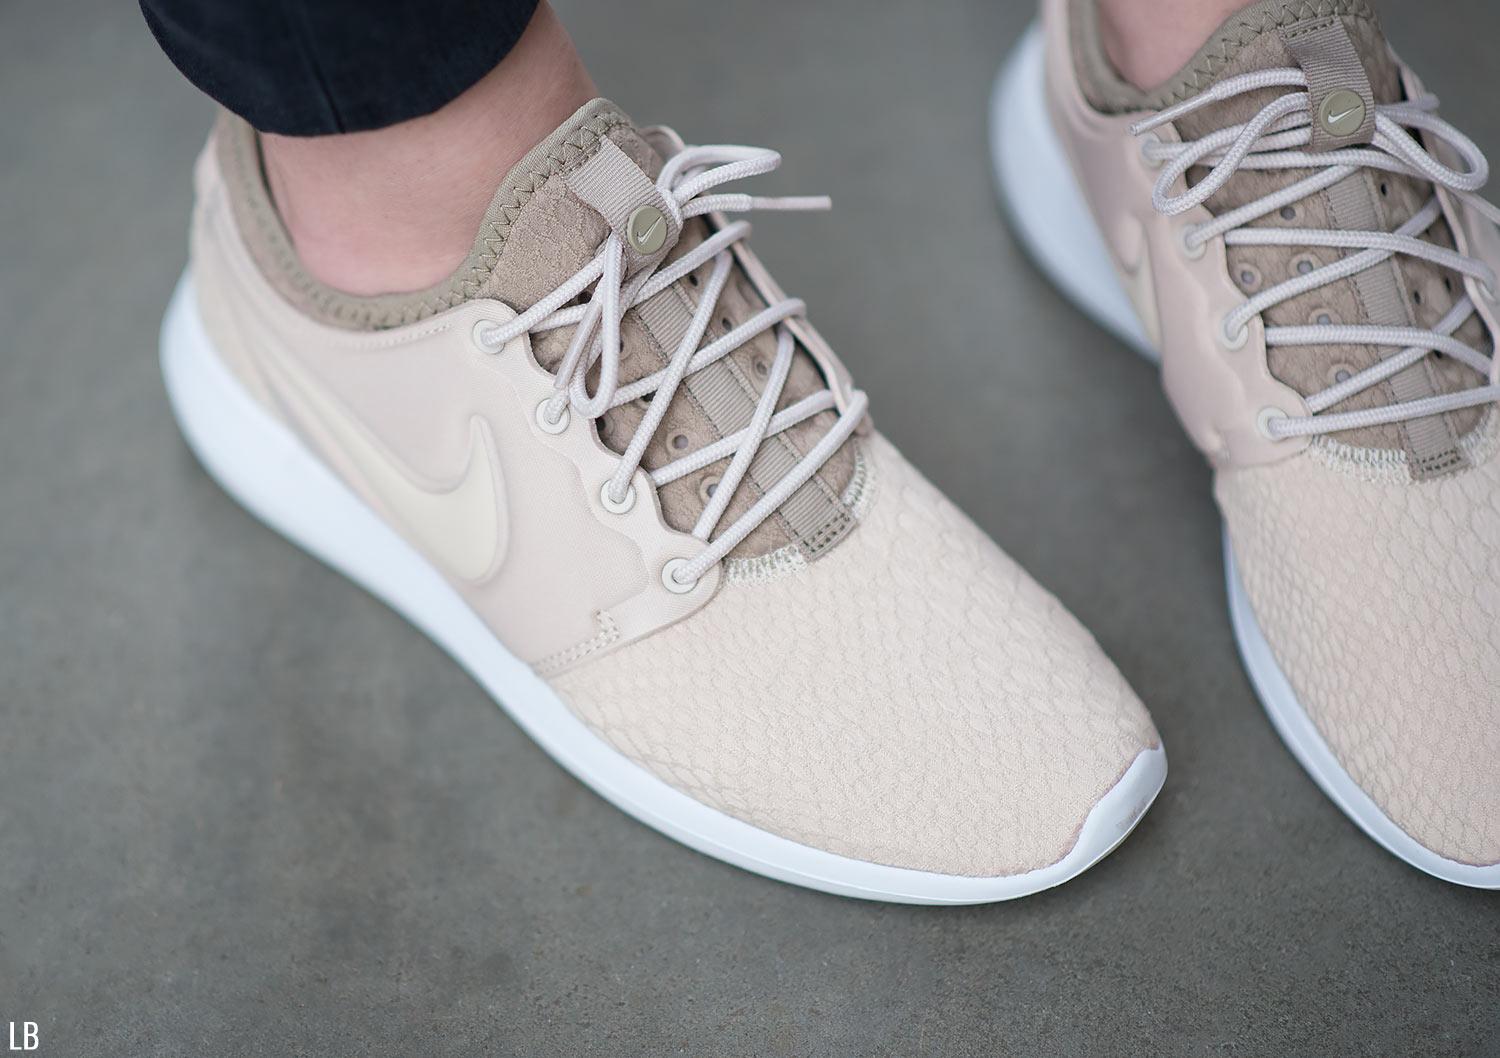 Majestuoso Generosidad Correspondiente My Nike Roshe Two SE Trainers in Oatmeal Review - Raindrops of Sapphire